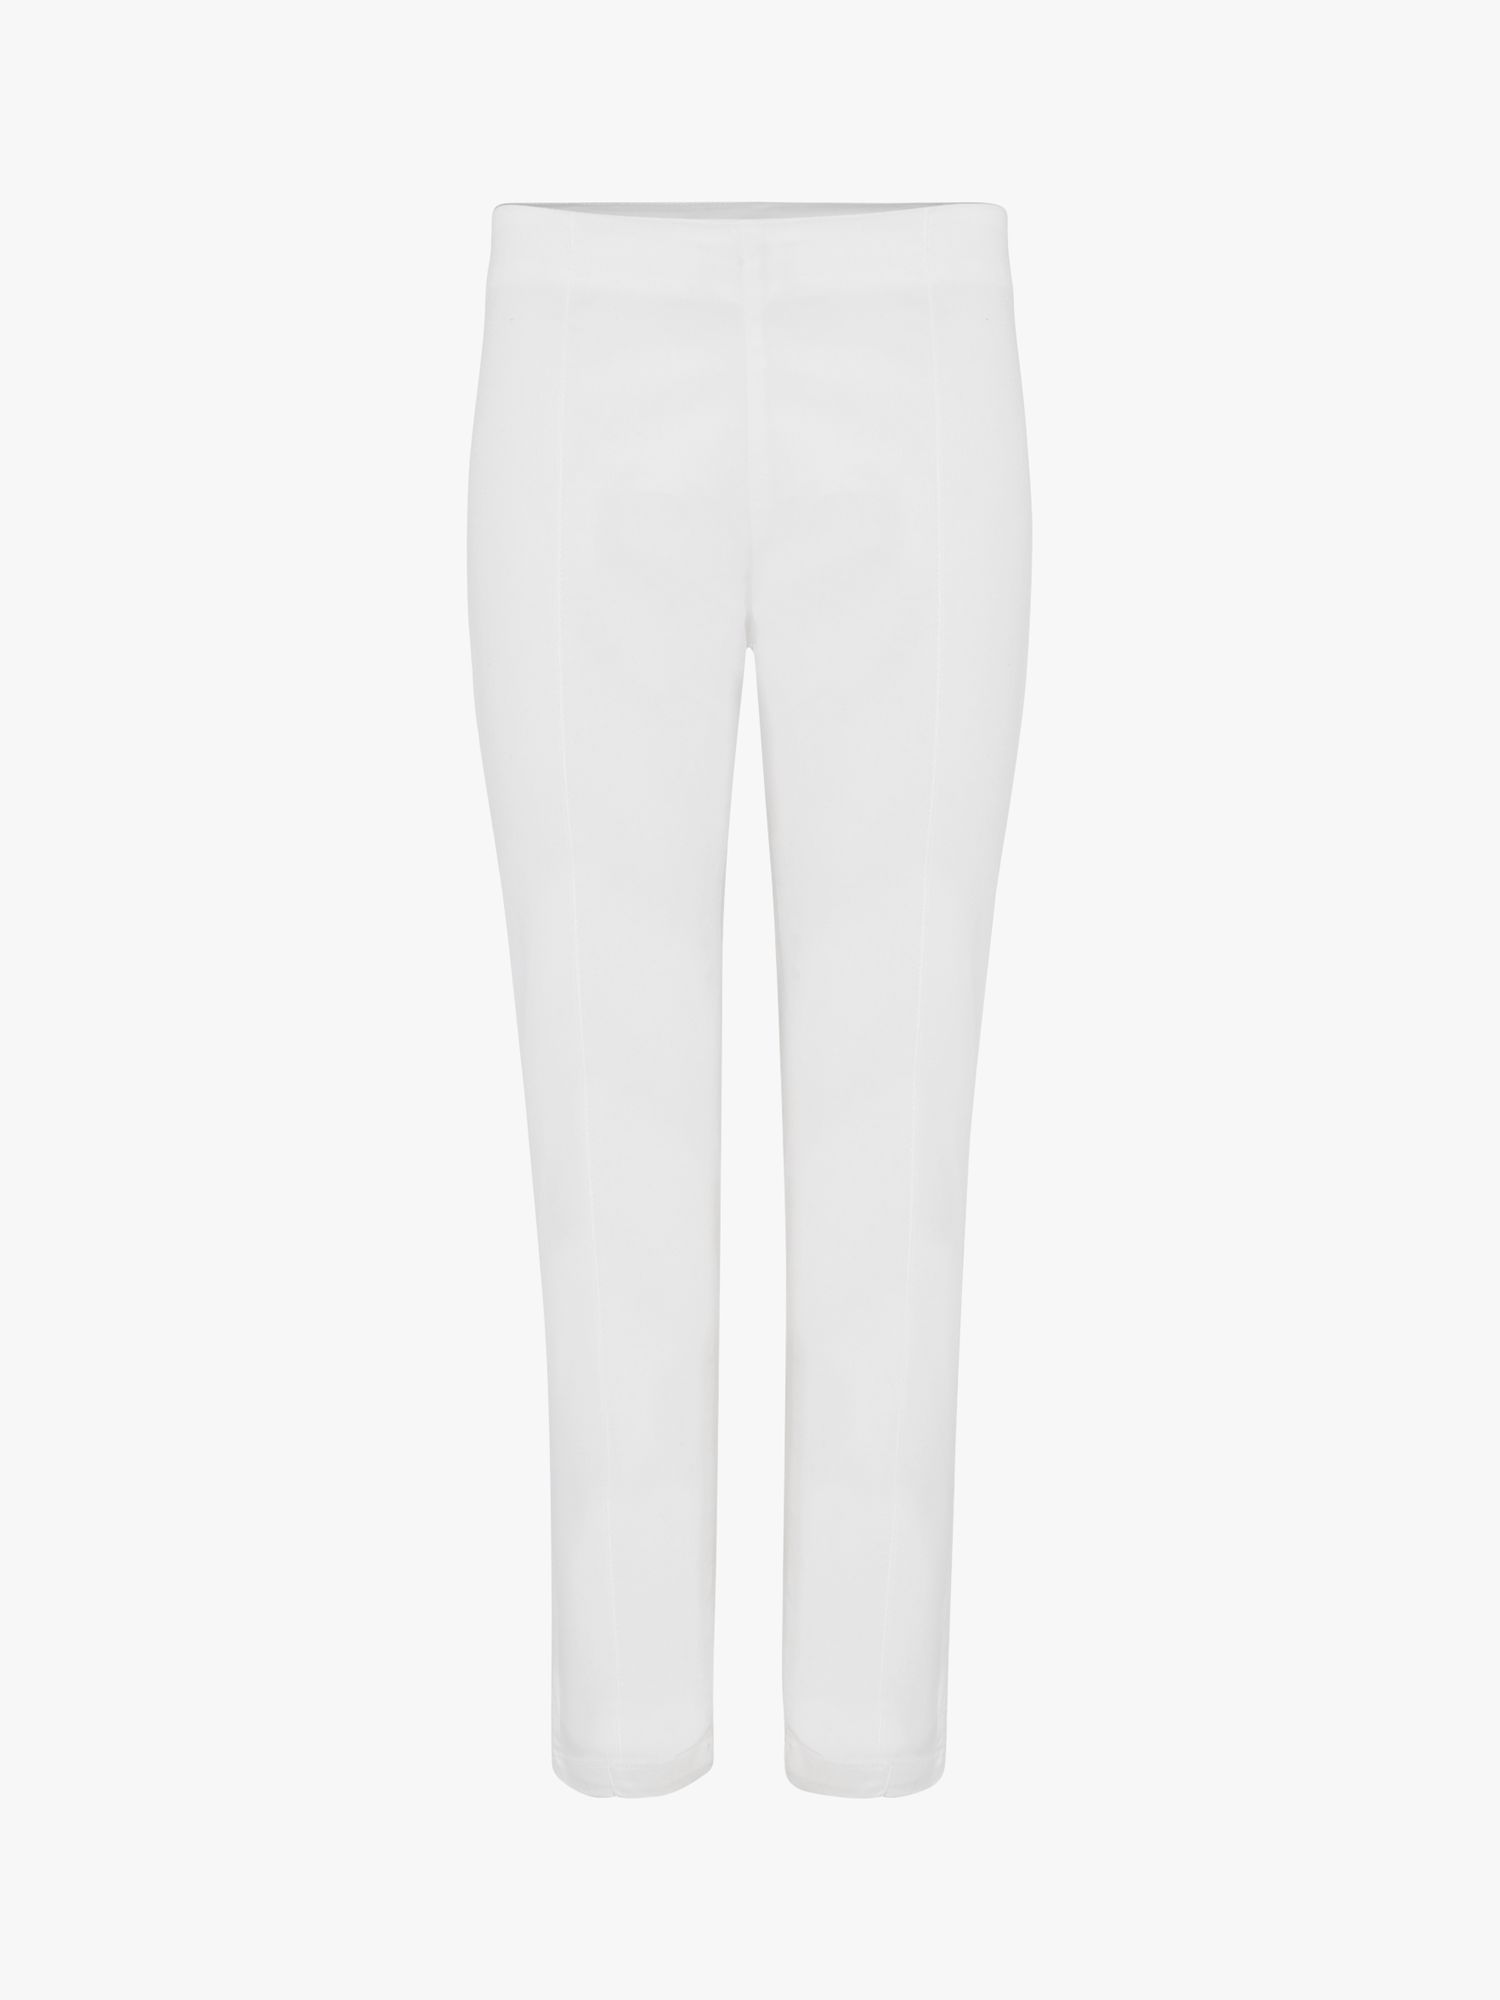 Buy Phase Eight White Miah Cropped Jeggings from the Next UK